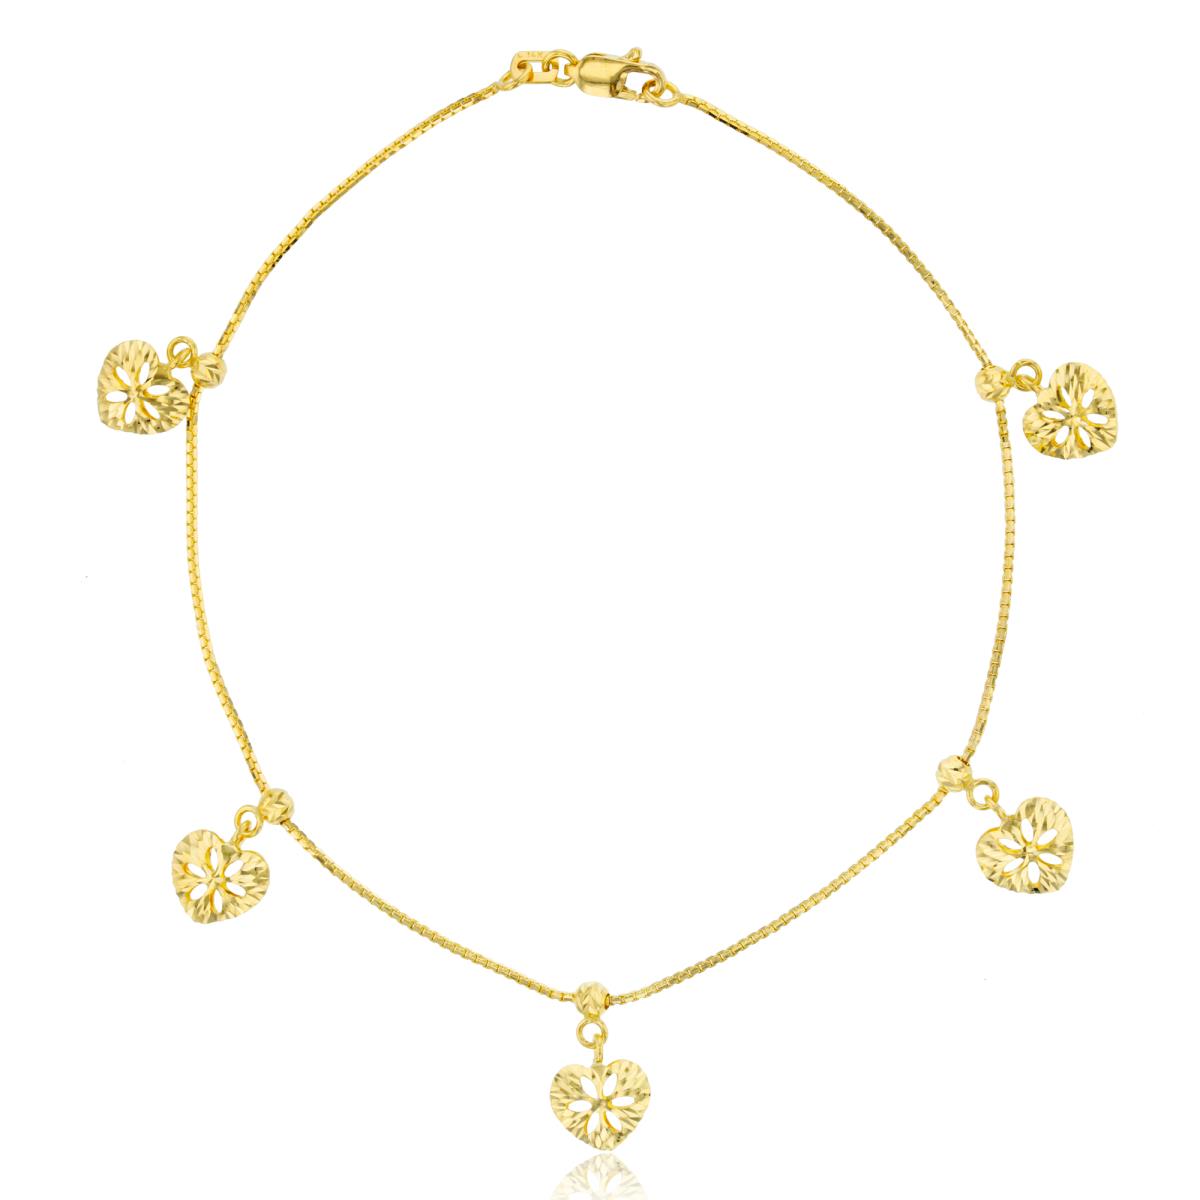 14K Yellow Gold DC Heart Charms on Chain 9"Bracelet